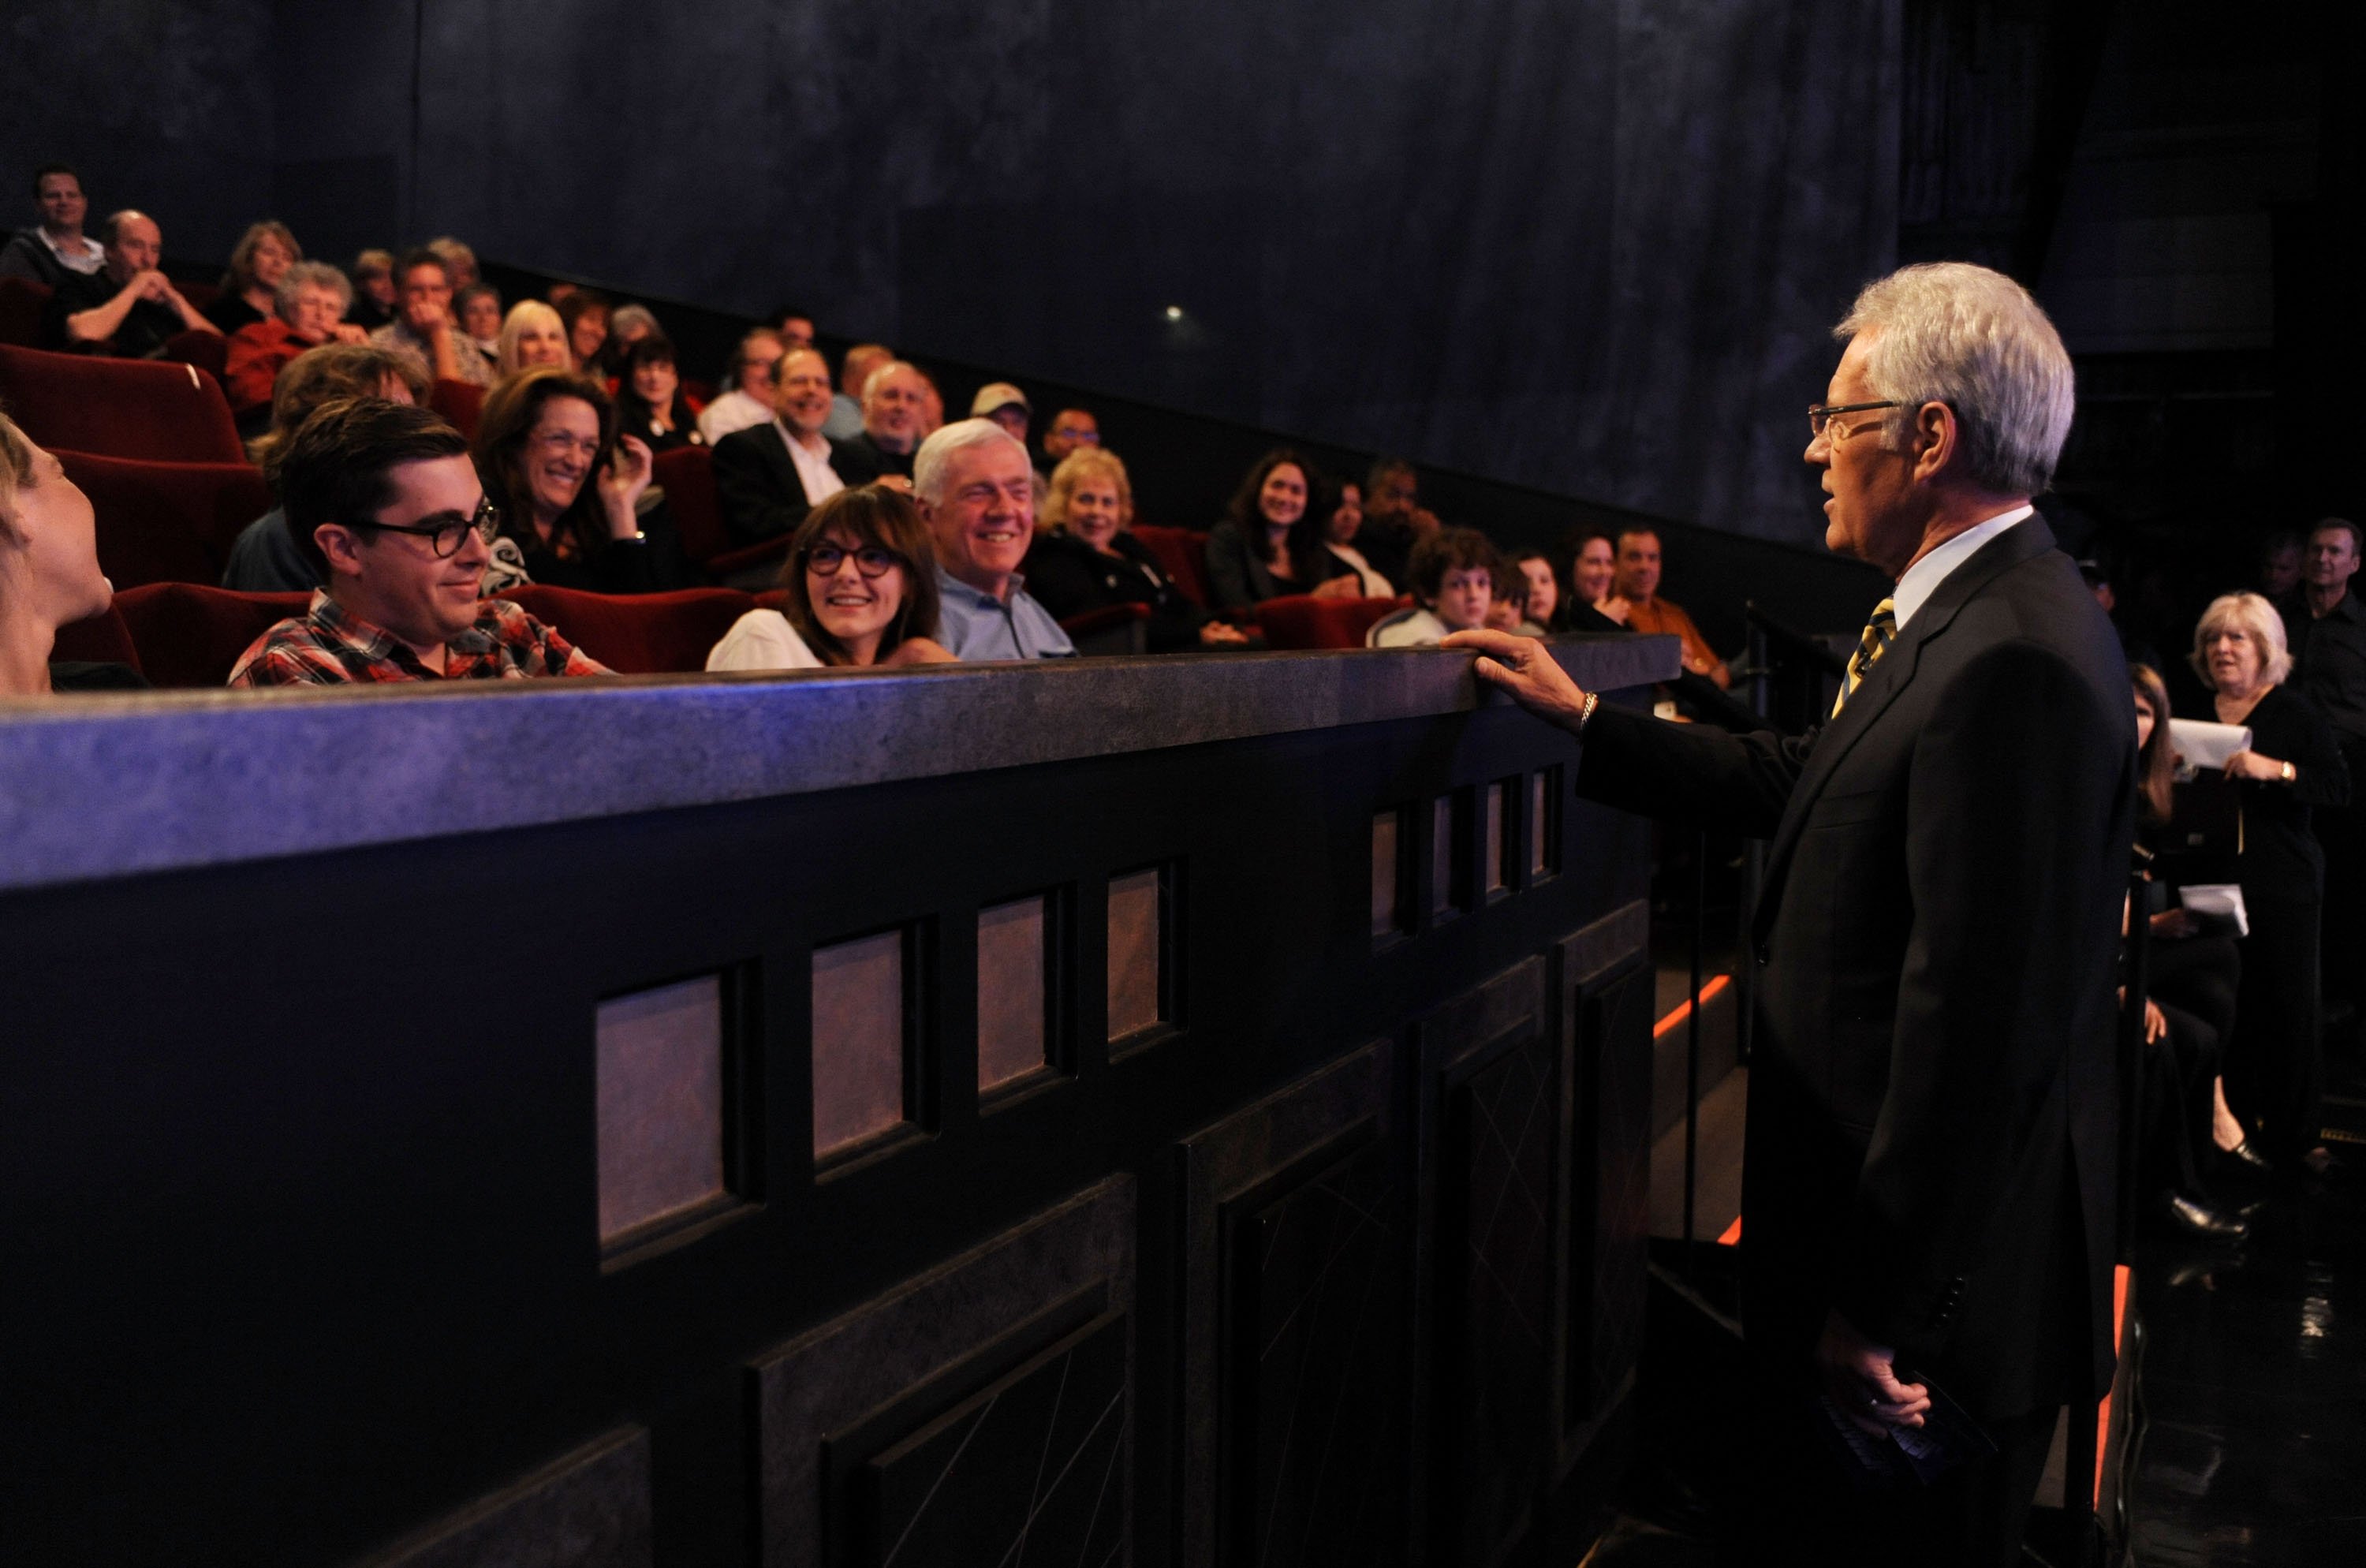 Game show host Alex Trebek (R) interacts with the audience on the set of the "Jeopardy!" Million Dollar Celebrity Invitational Tournament Show Taping on April 17, 2010| Photo: Getty Images